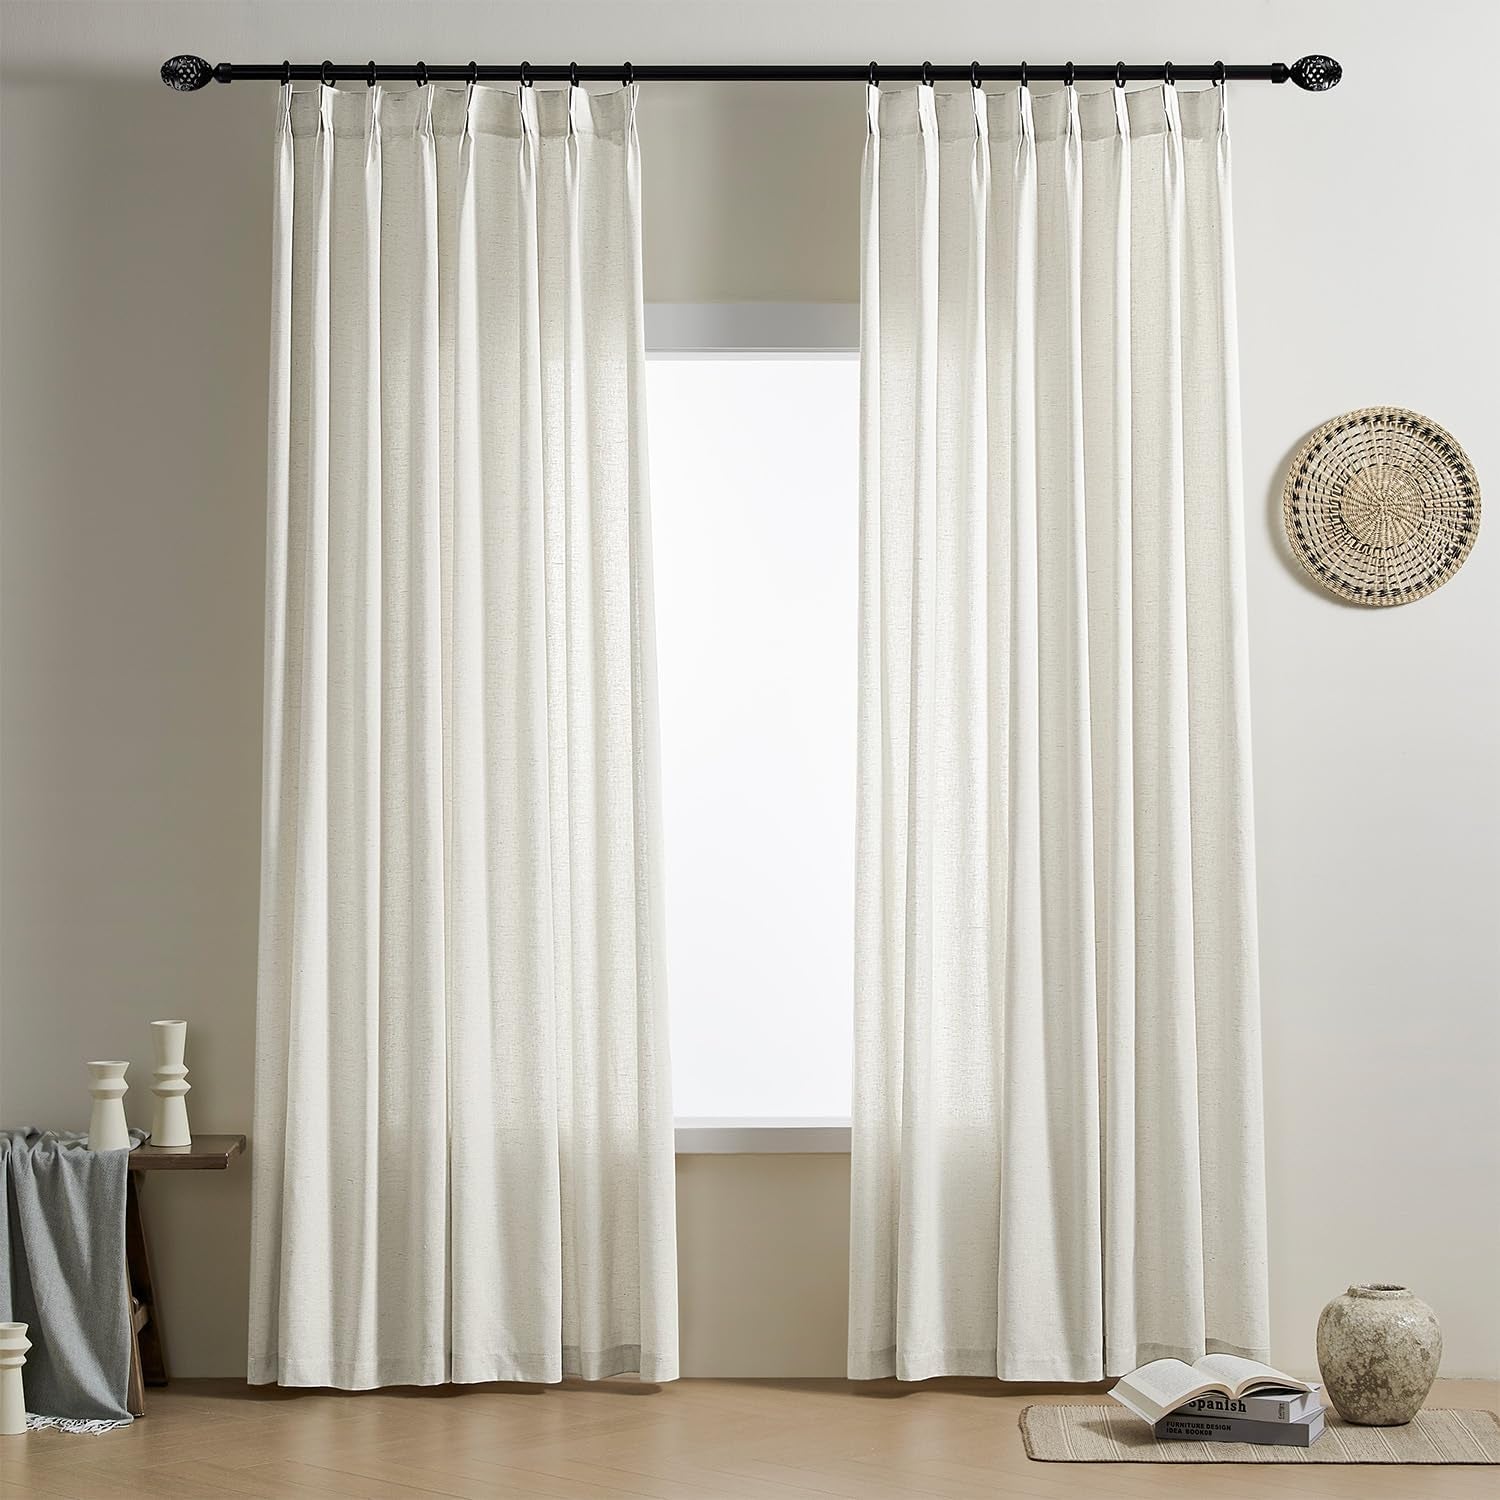 Rutterllow Pinch Pleated Flax Linen Curtains 80 Inch Length 2 Panels Set for Living Room Back Tab Semi Sheer Light Filtering Privacy Farmhouse Rustic Curtains for Bedroom  Rutterllow Natural 50"W X 108"L X2 